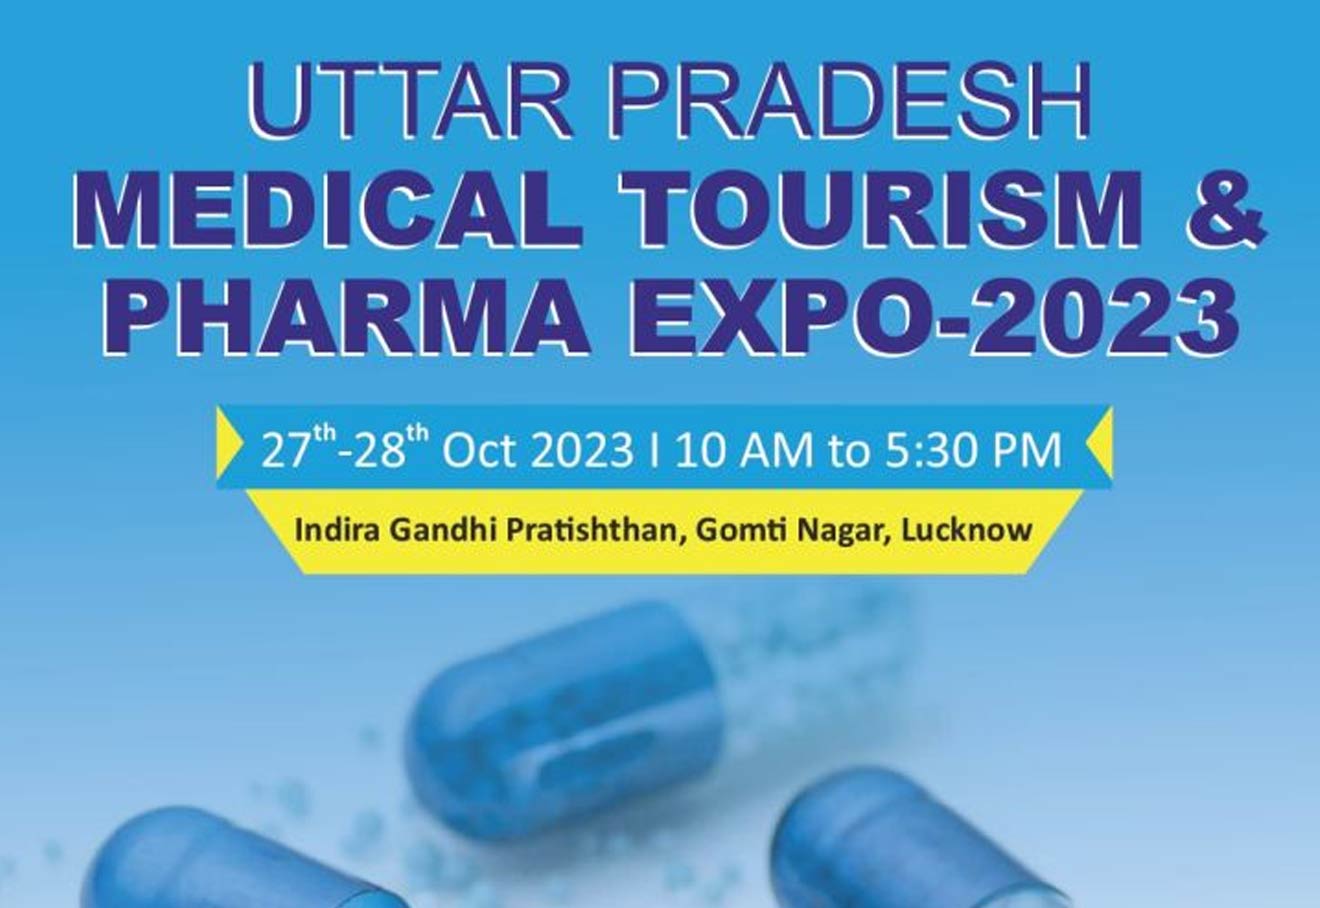 UP Medical Tourism Summit And Pharma Expo To Be Held In Lucknow On Oct 27-28